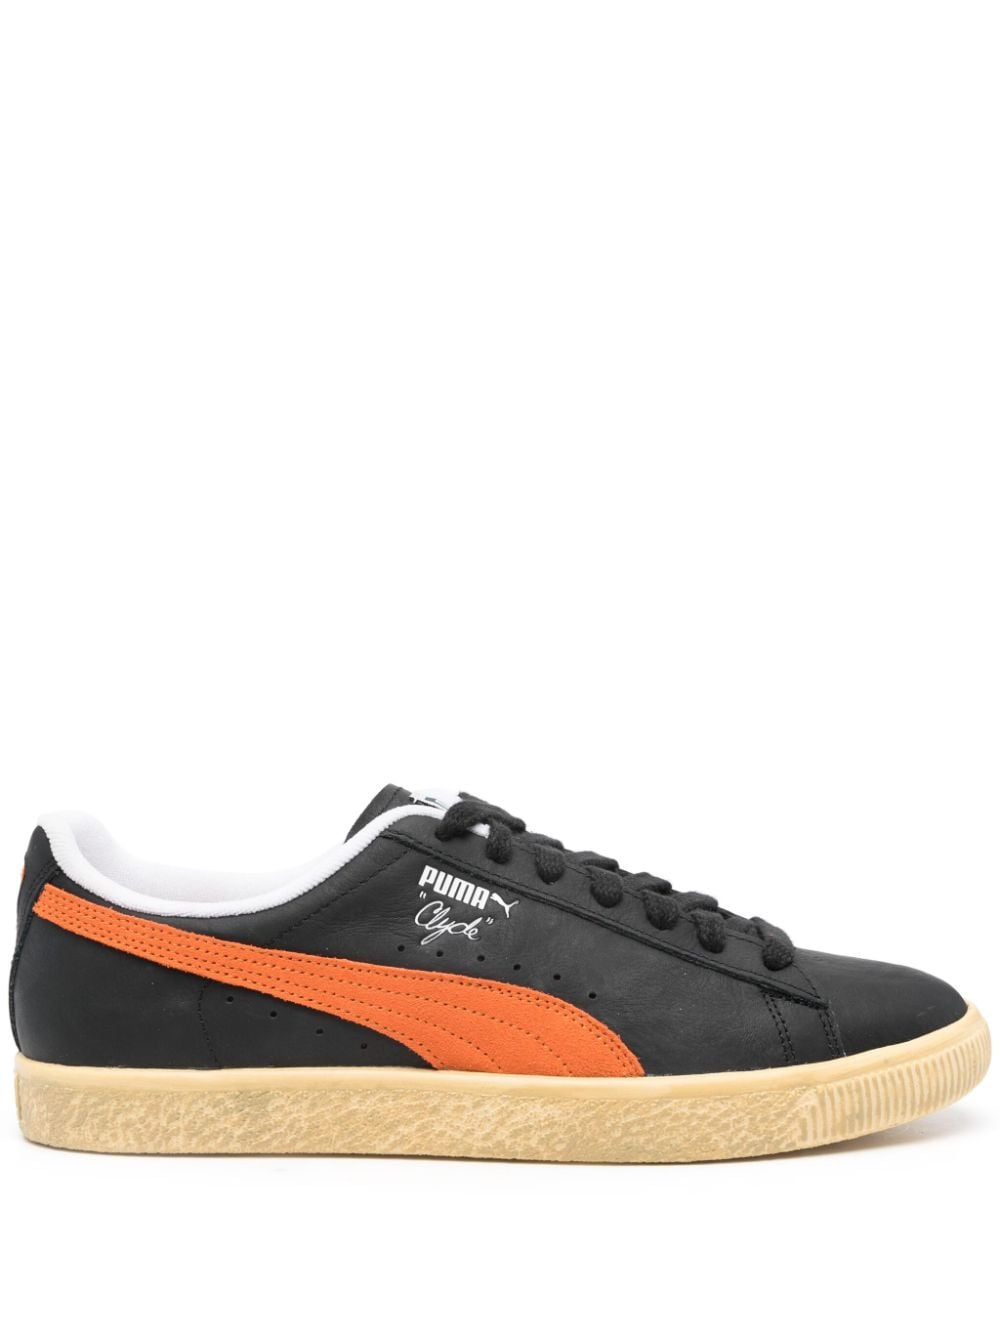 PUMA CLYDE VINTAGE LEATHER SNEAKERS